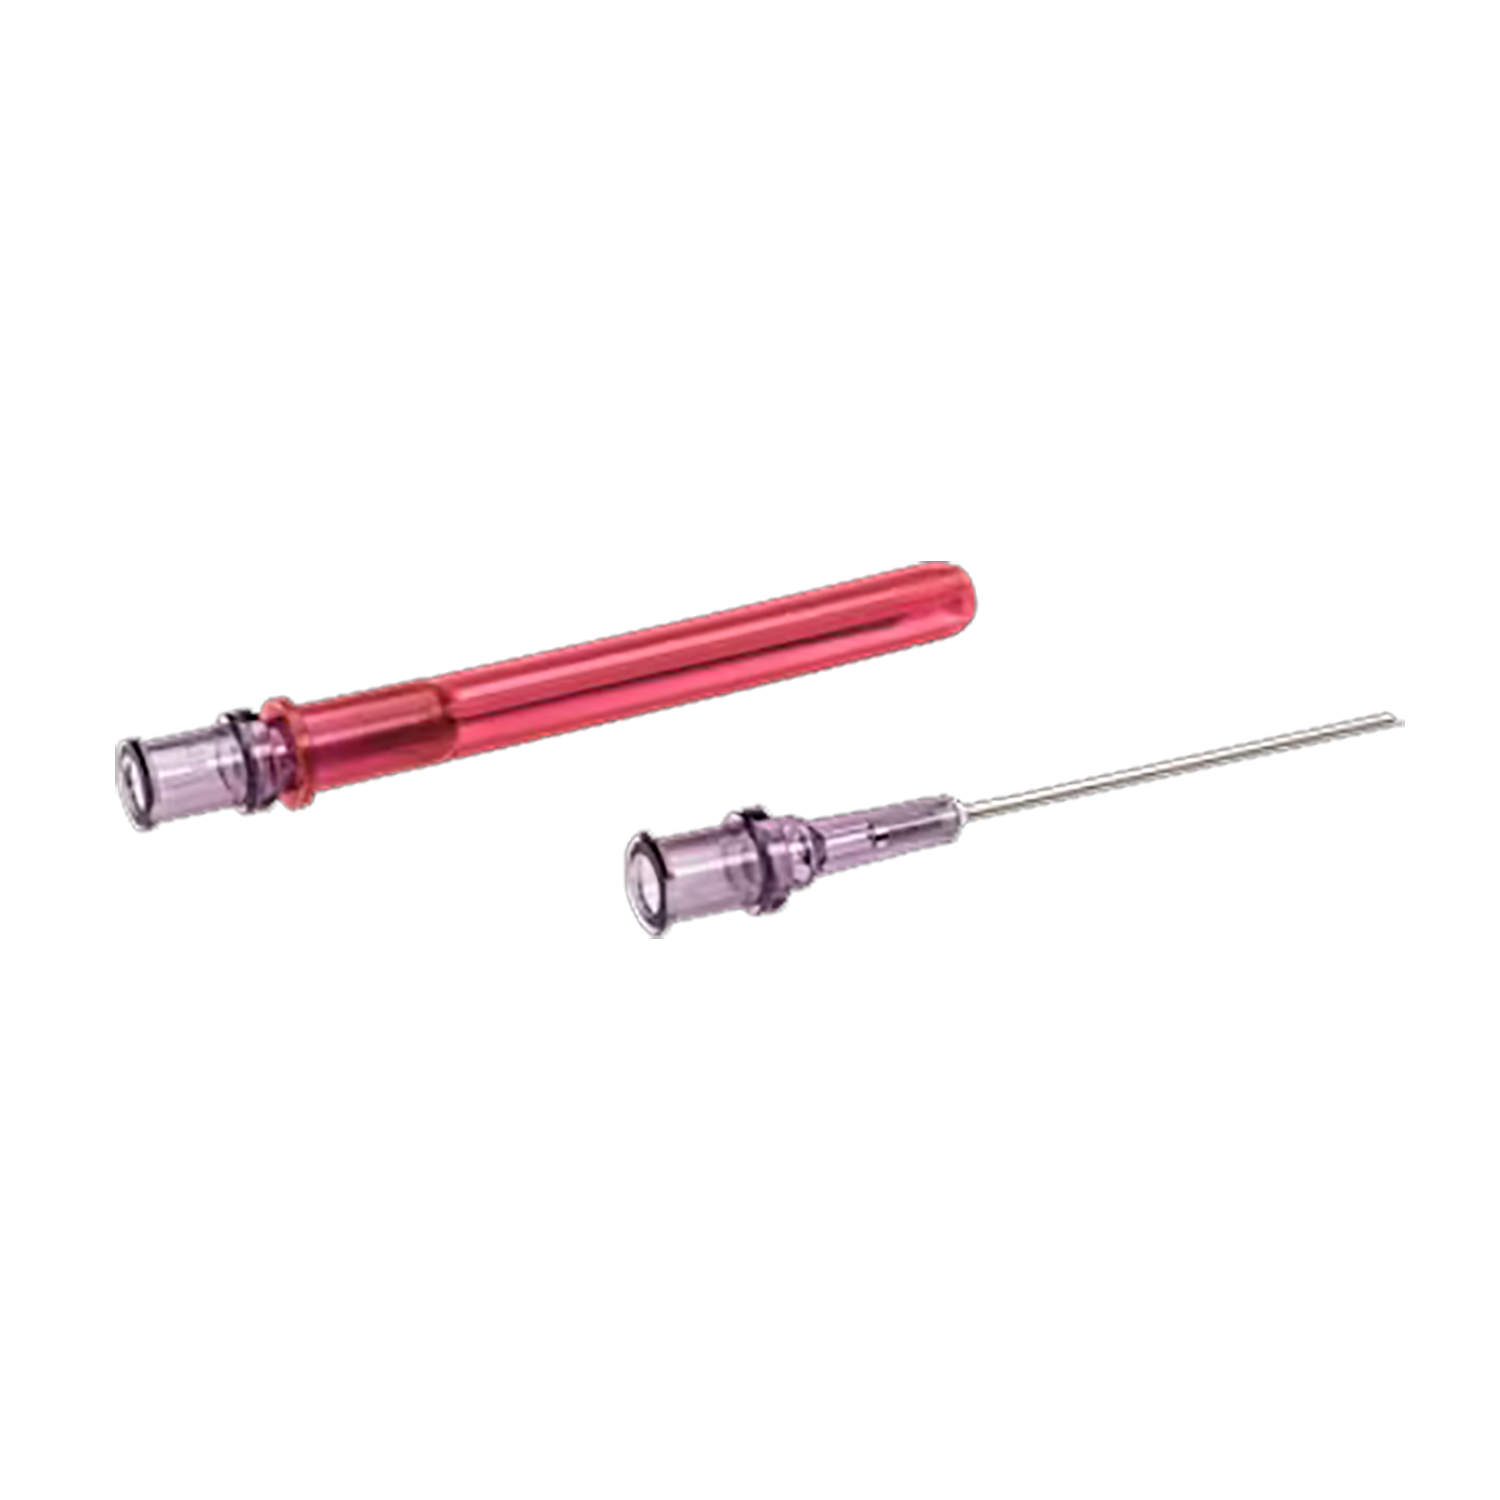 BD Blunt Fill Needle | 18G x 1 1/2" | Pack of 1000 (2)